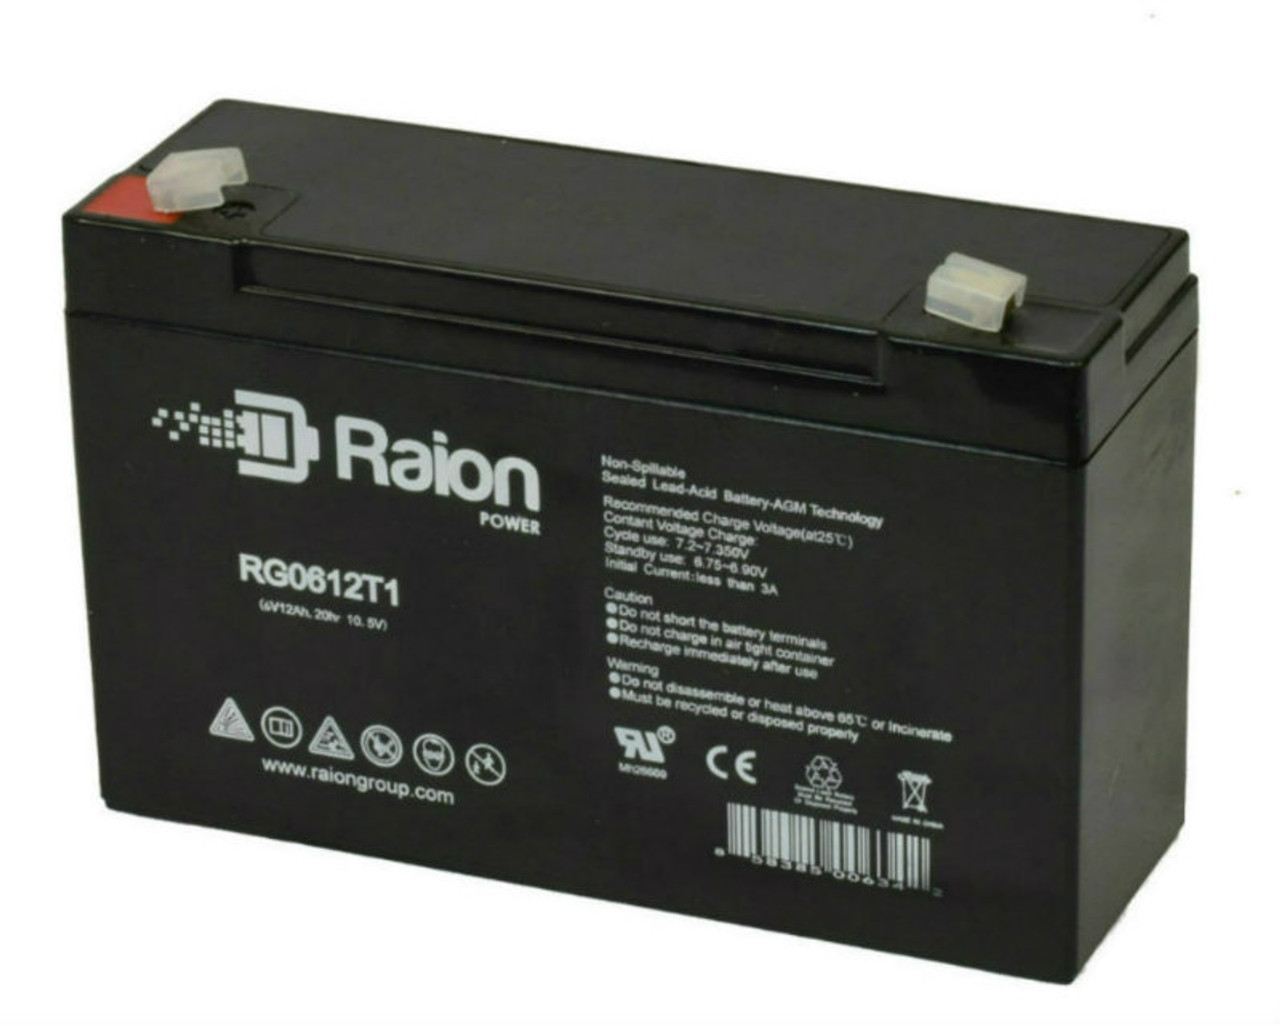 Raion Power RG06120T1 Replacement 6V 12Ah Emergency Light Battery for Exide 153302006